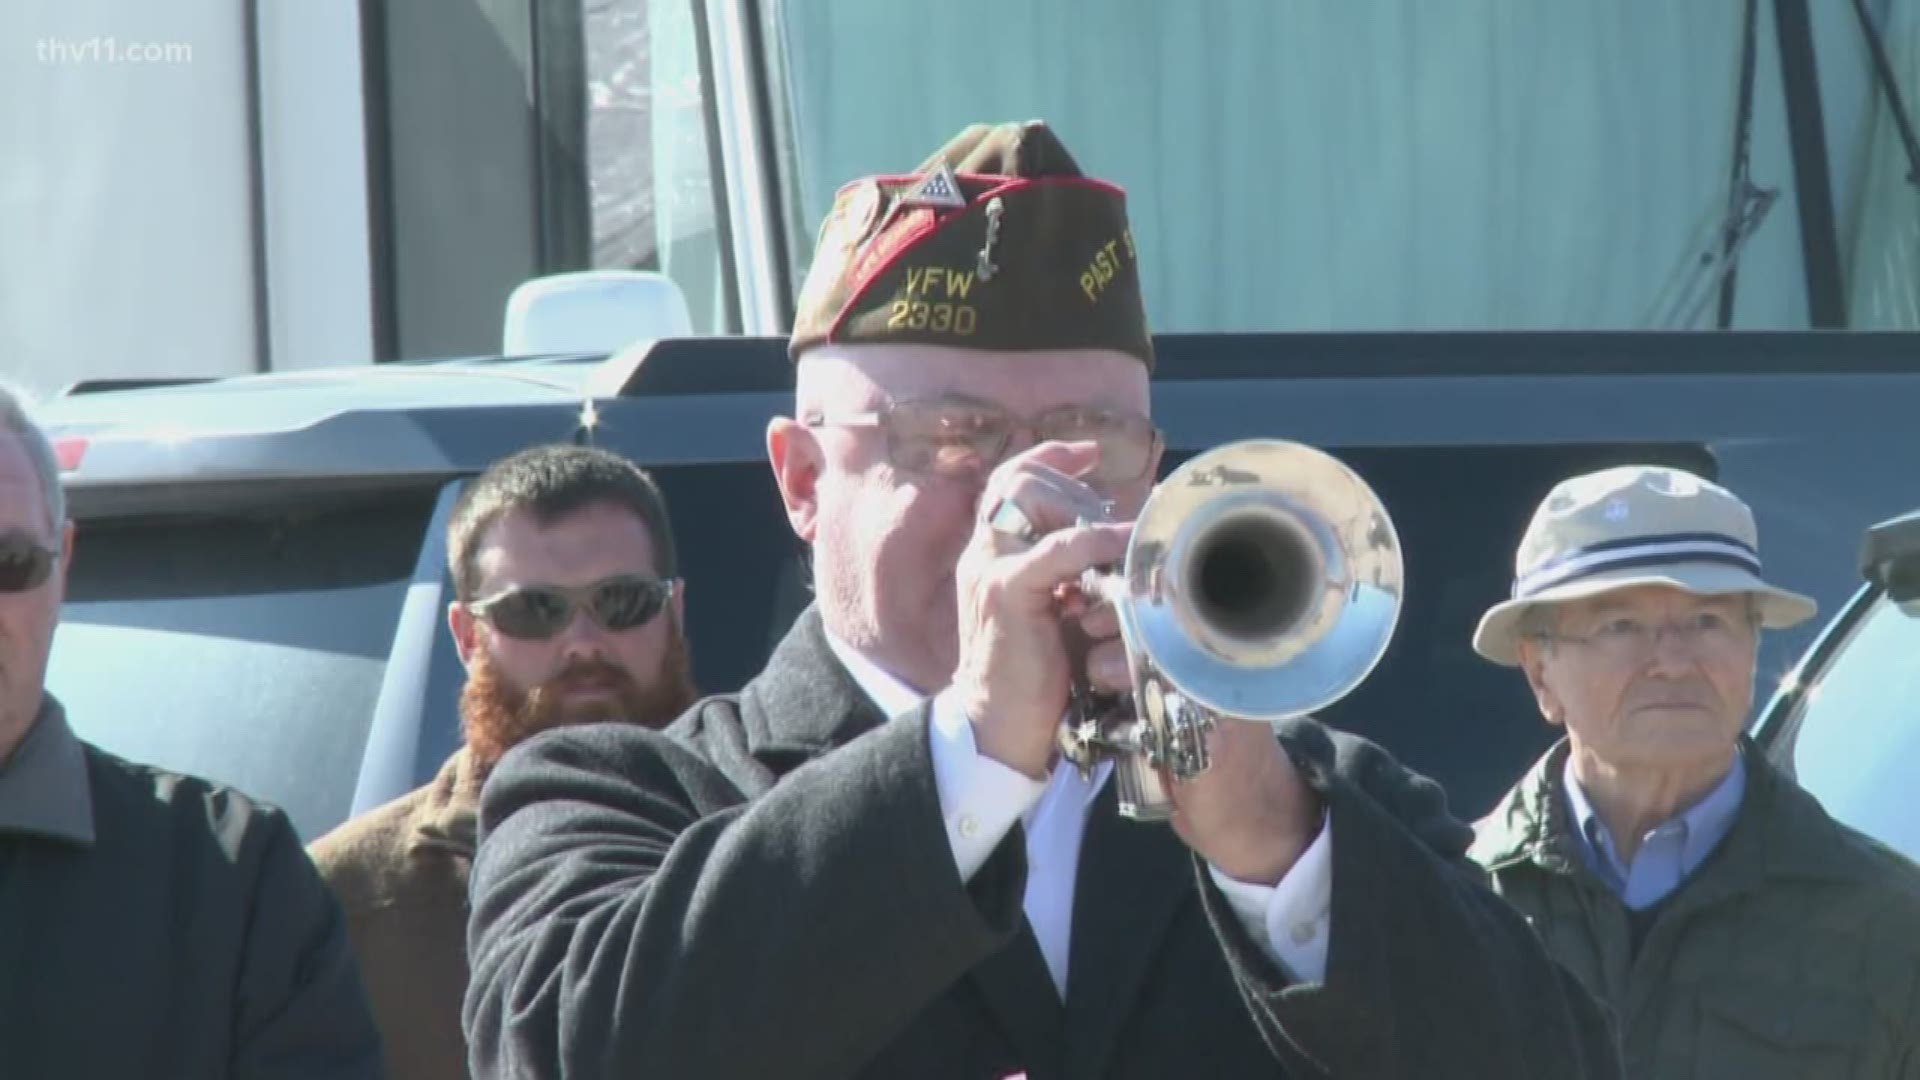 Veterans in the Conway area were not only thanked for their service today, but they were also honored during a ceremony to kick off veteran's day weekend.